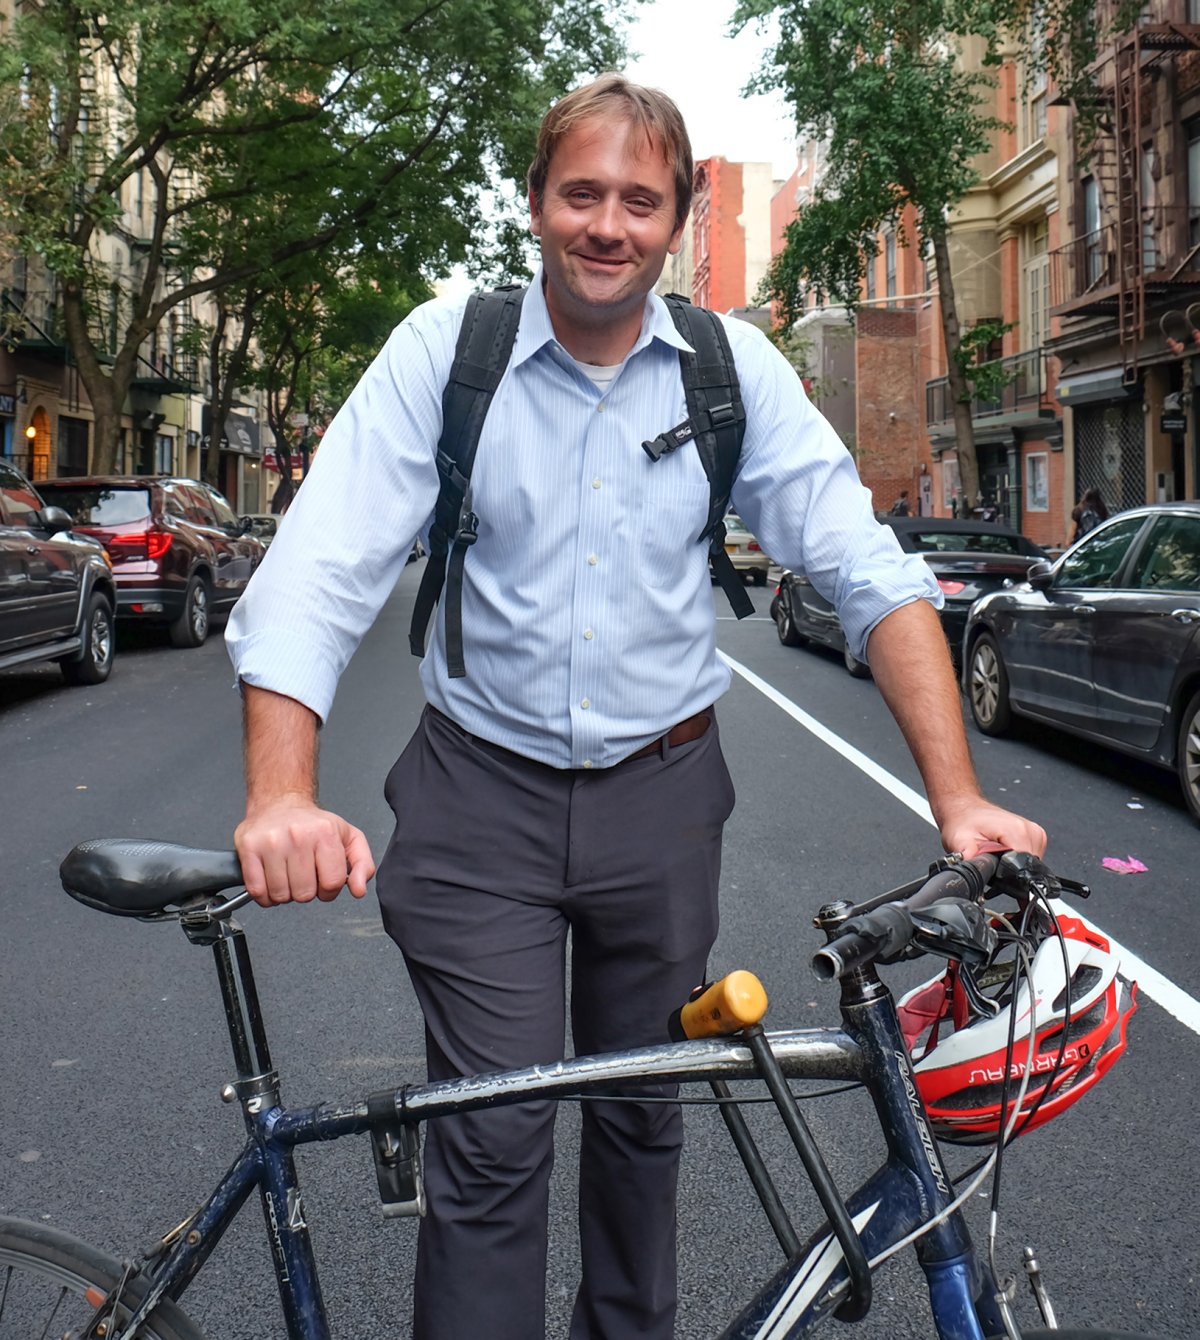 On the move: Jamie Rogers with his bicycle outside the C.B. 3 office on E. Fourth St. Photo by Tequila Minsky